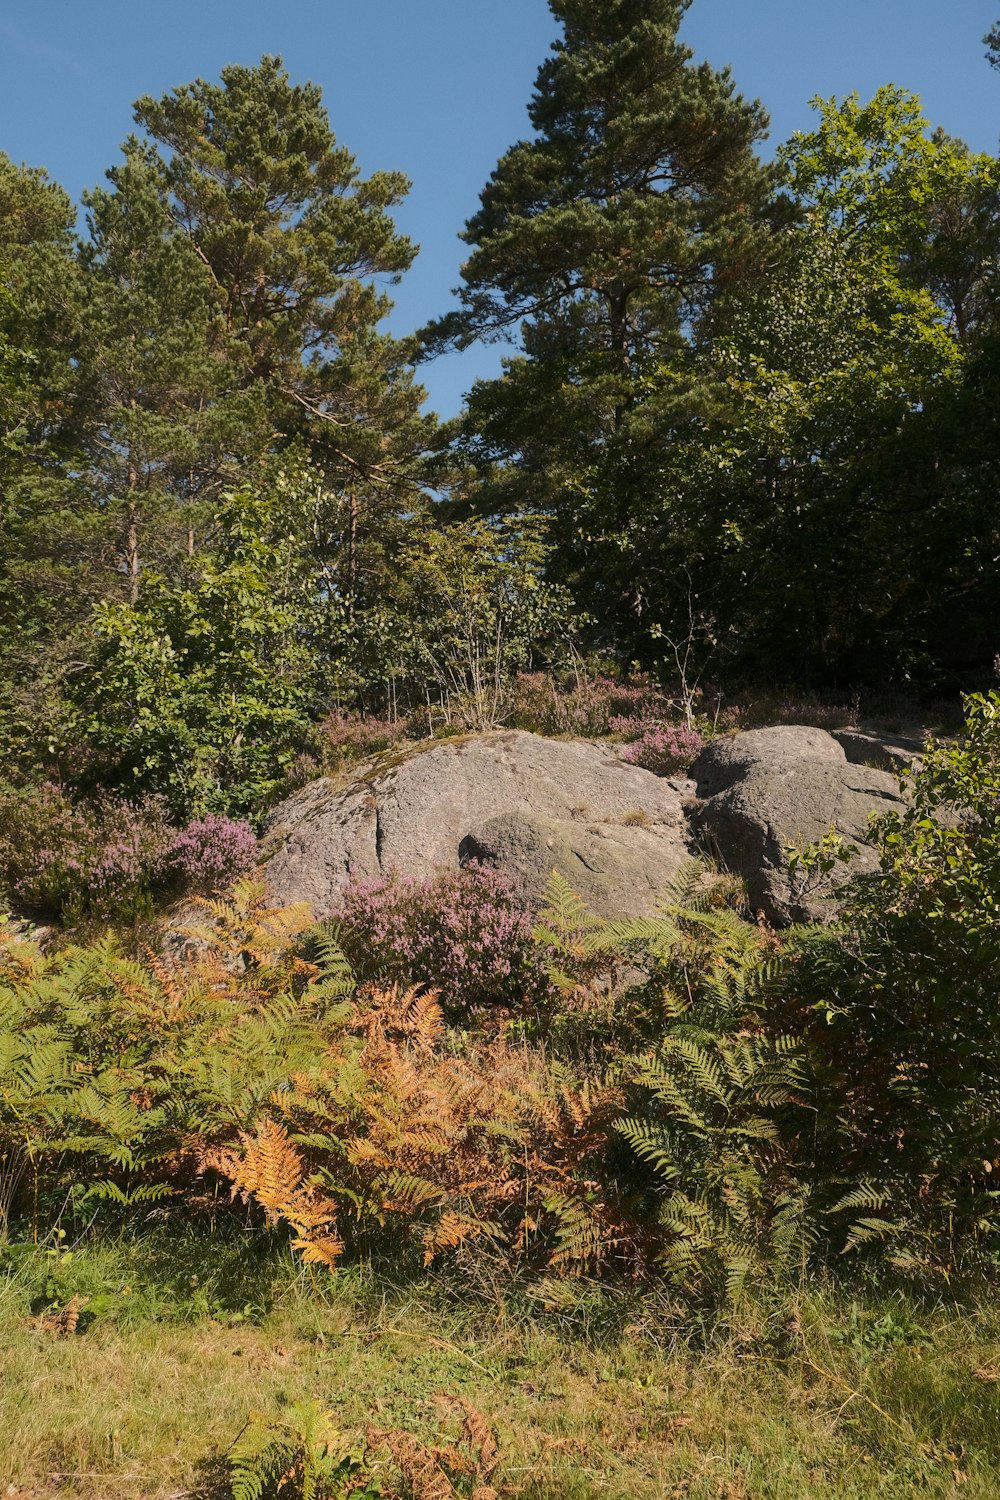 a large rock sitting in the middle of a forest